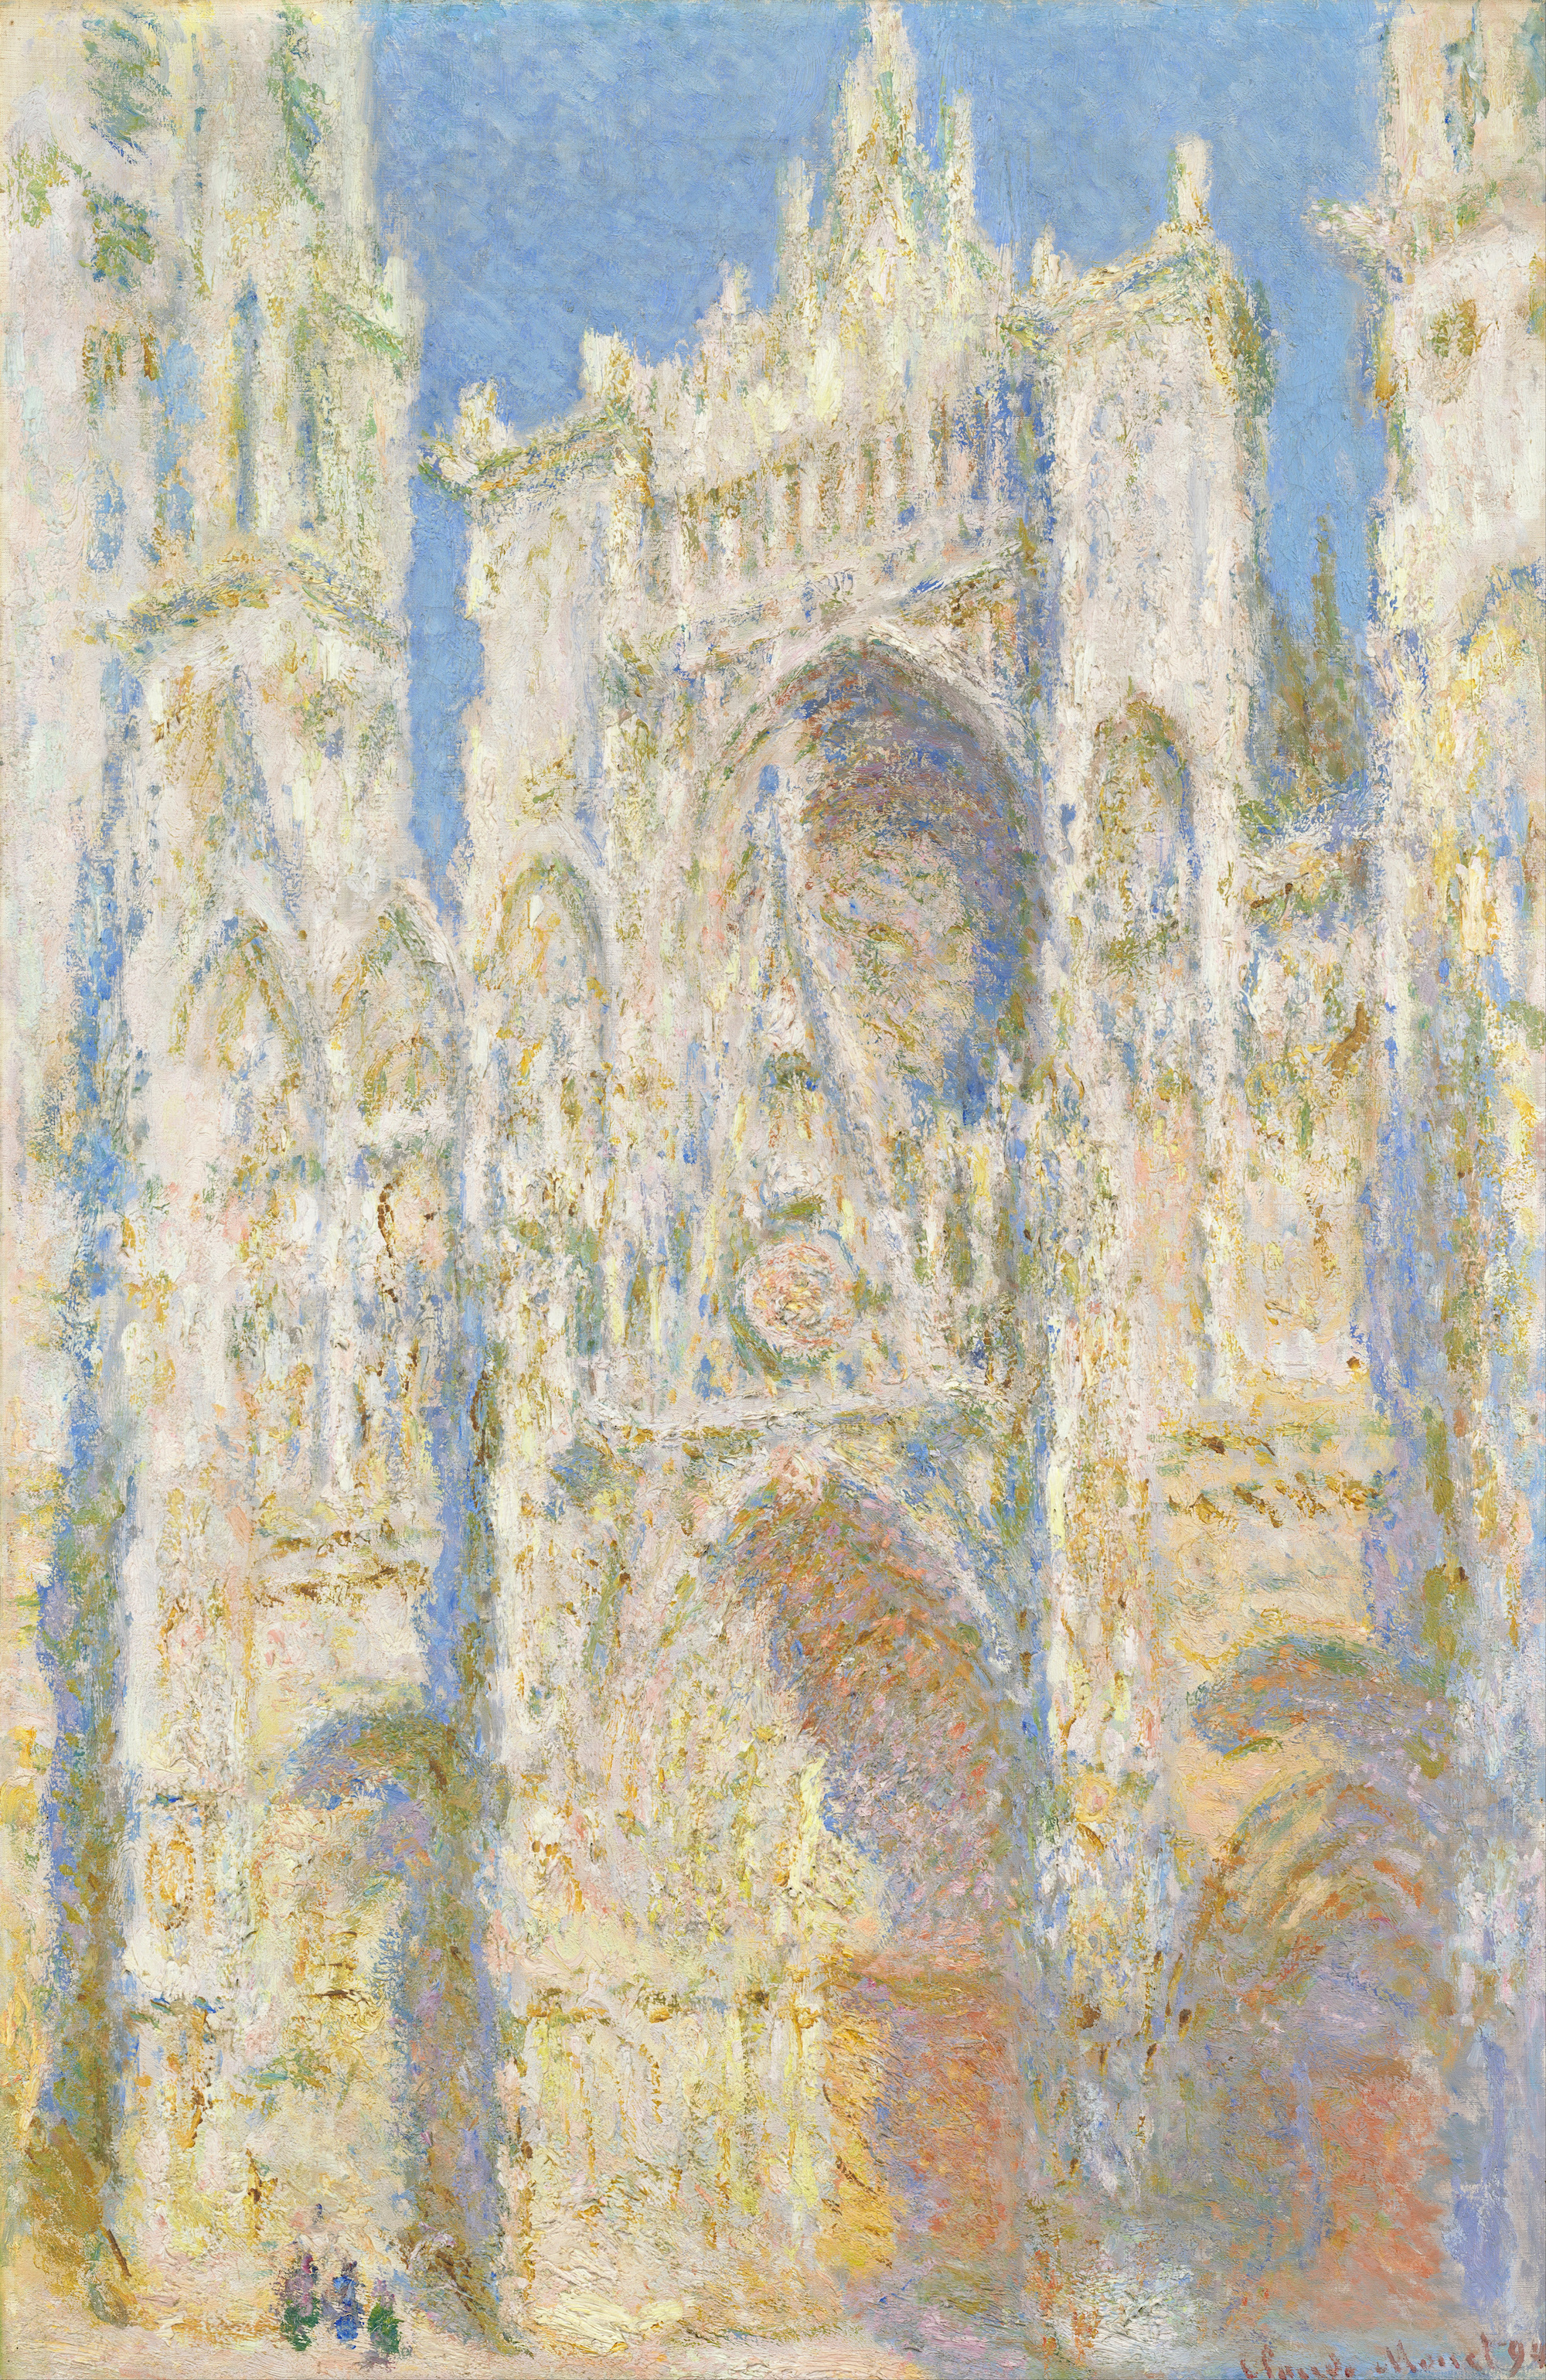 Rouen Cathedral, West Façade, Sunlight by Claude Monet - 1894 - 65.8 x 100 cm National Gallery of Art